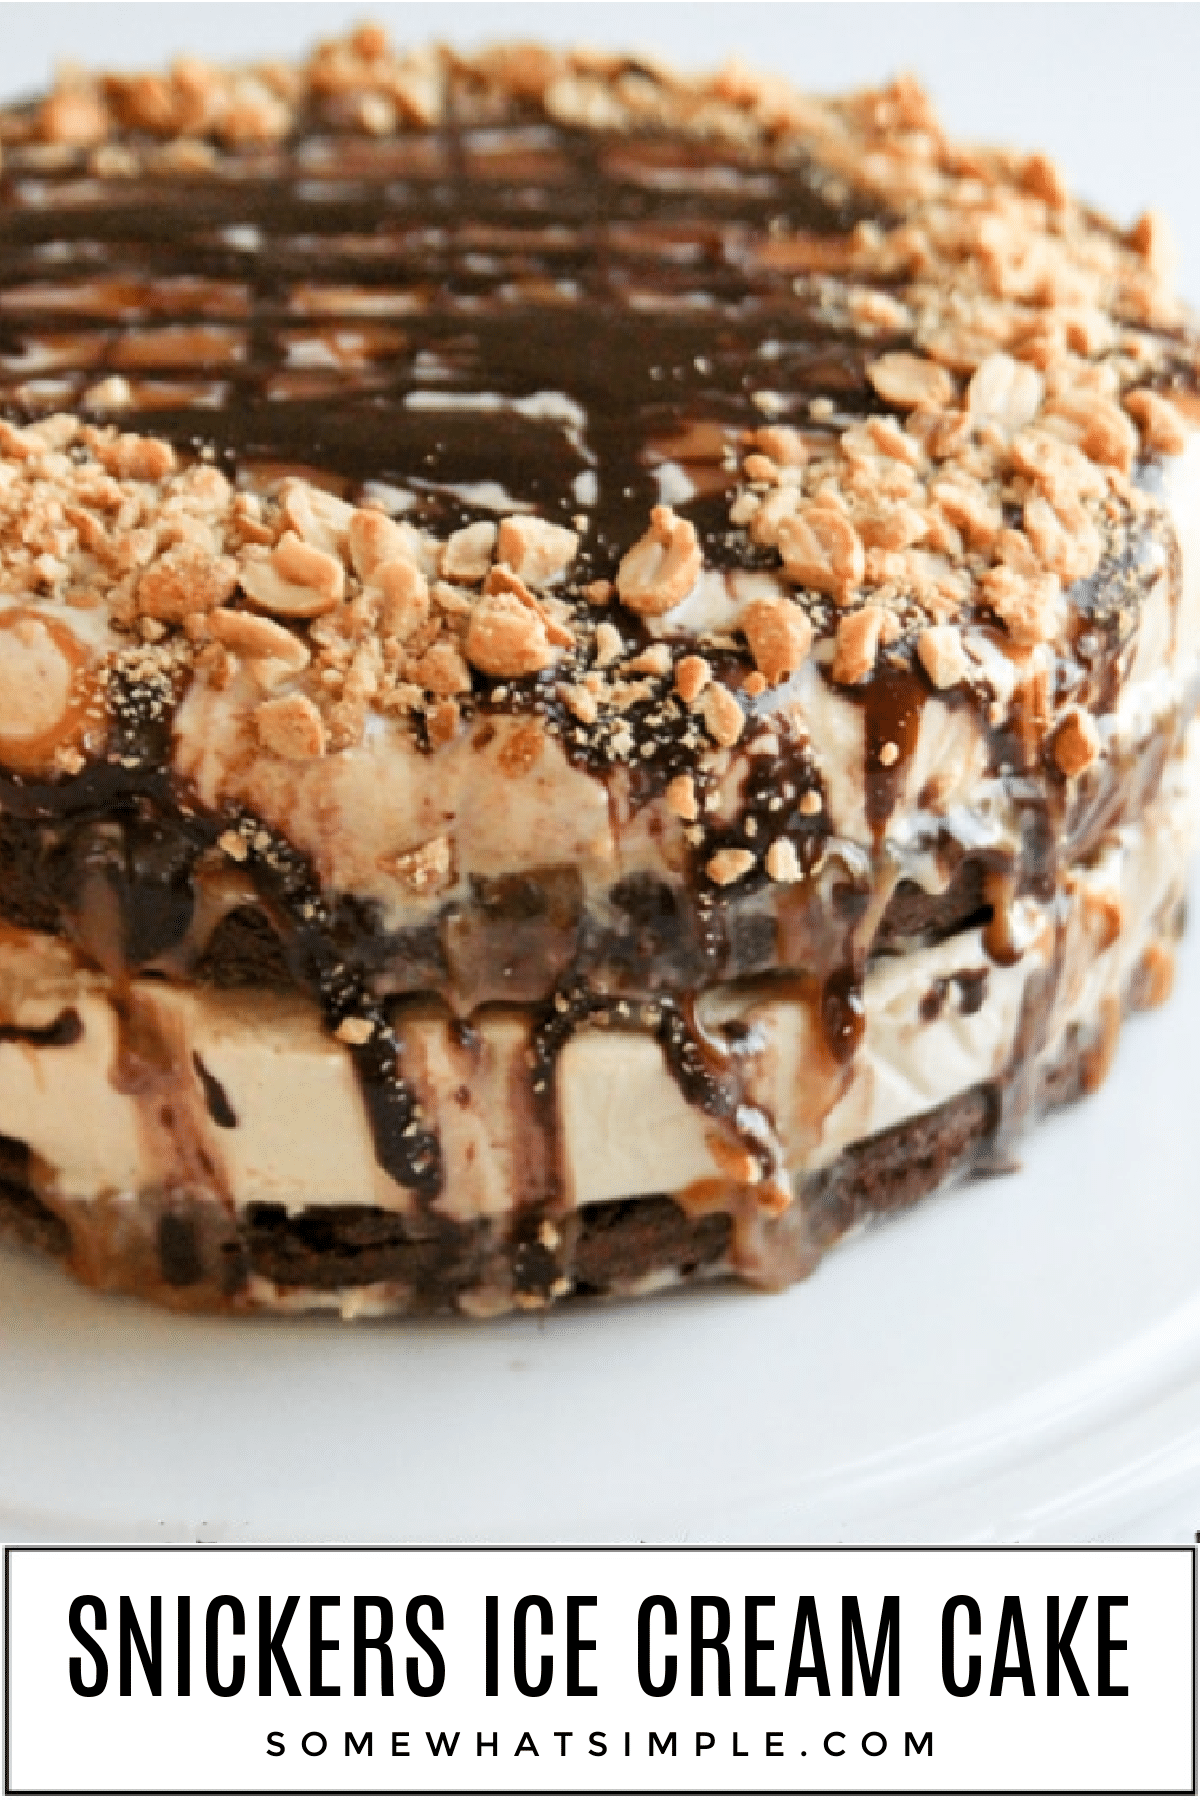 Homemade snickers ice cream cake is layered with peanut butter ice cream, fudgy brownie, salted caramel, fudge, and chopped peanuts. via @somewhatsimple